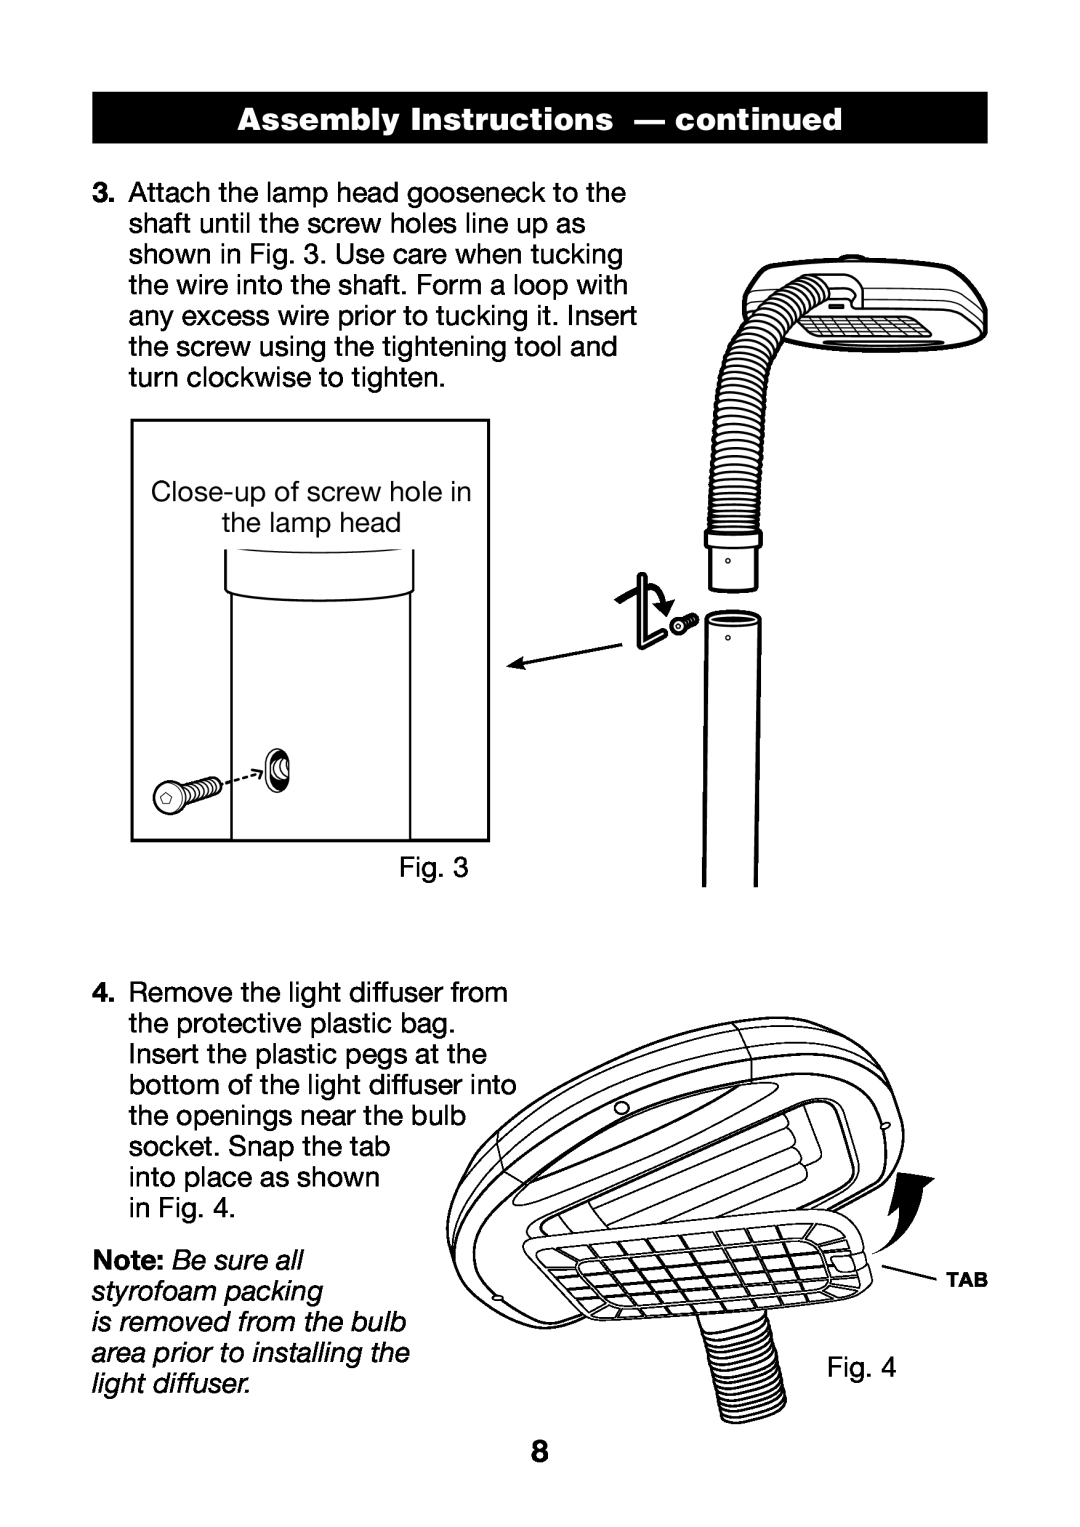 Verilux VF02 manual Assembly Instructions - continued, Note Be sure all, styrofoam packing, is removed from the bulb 